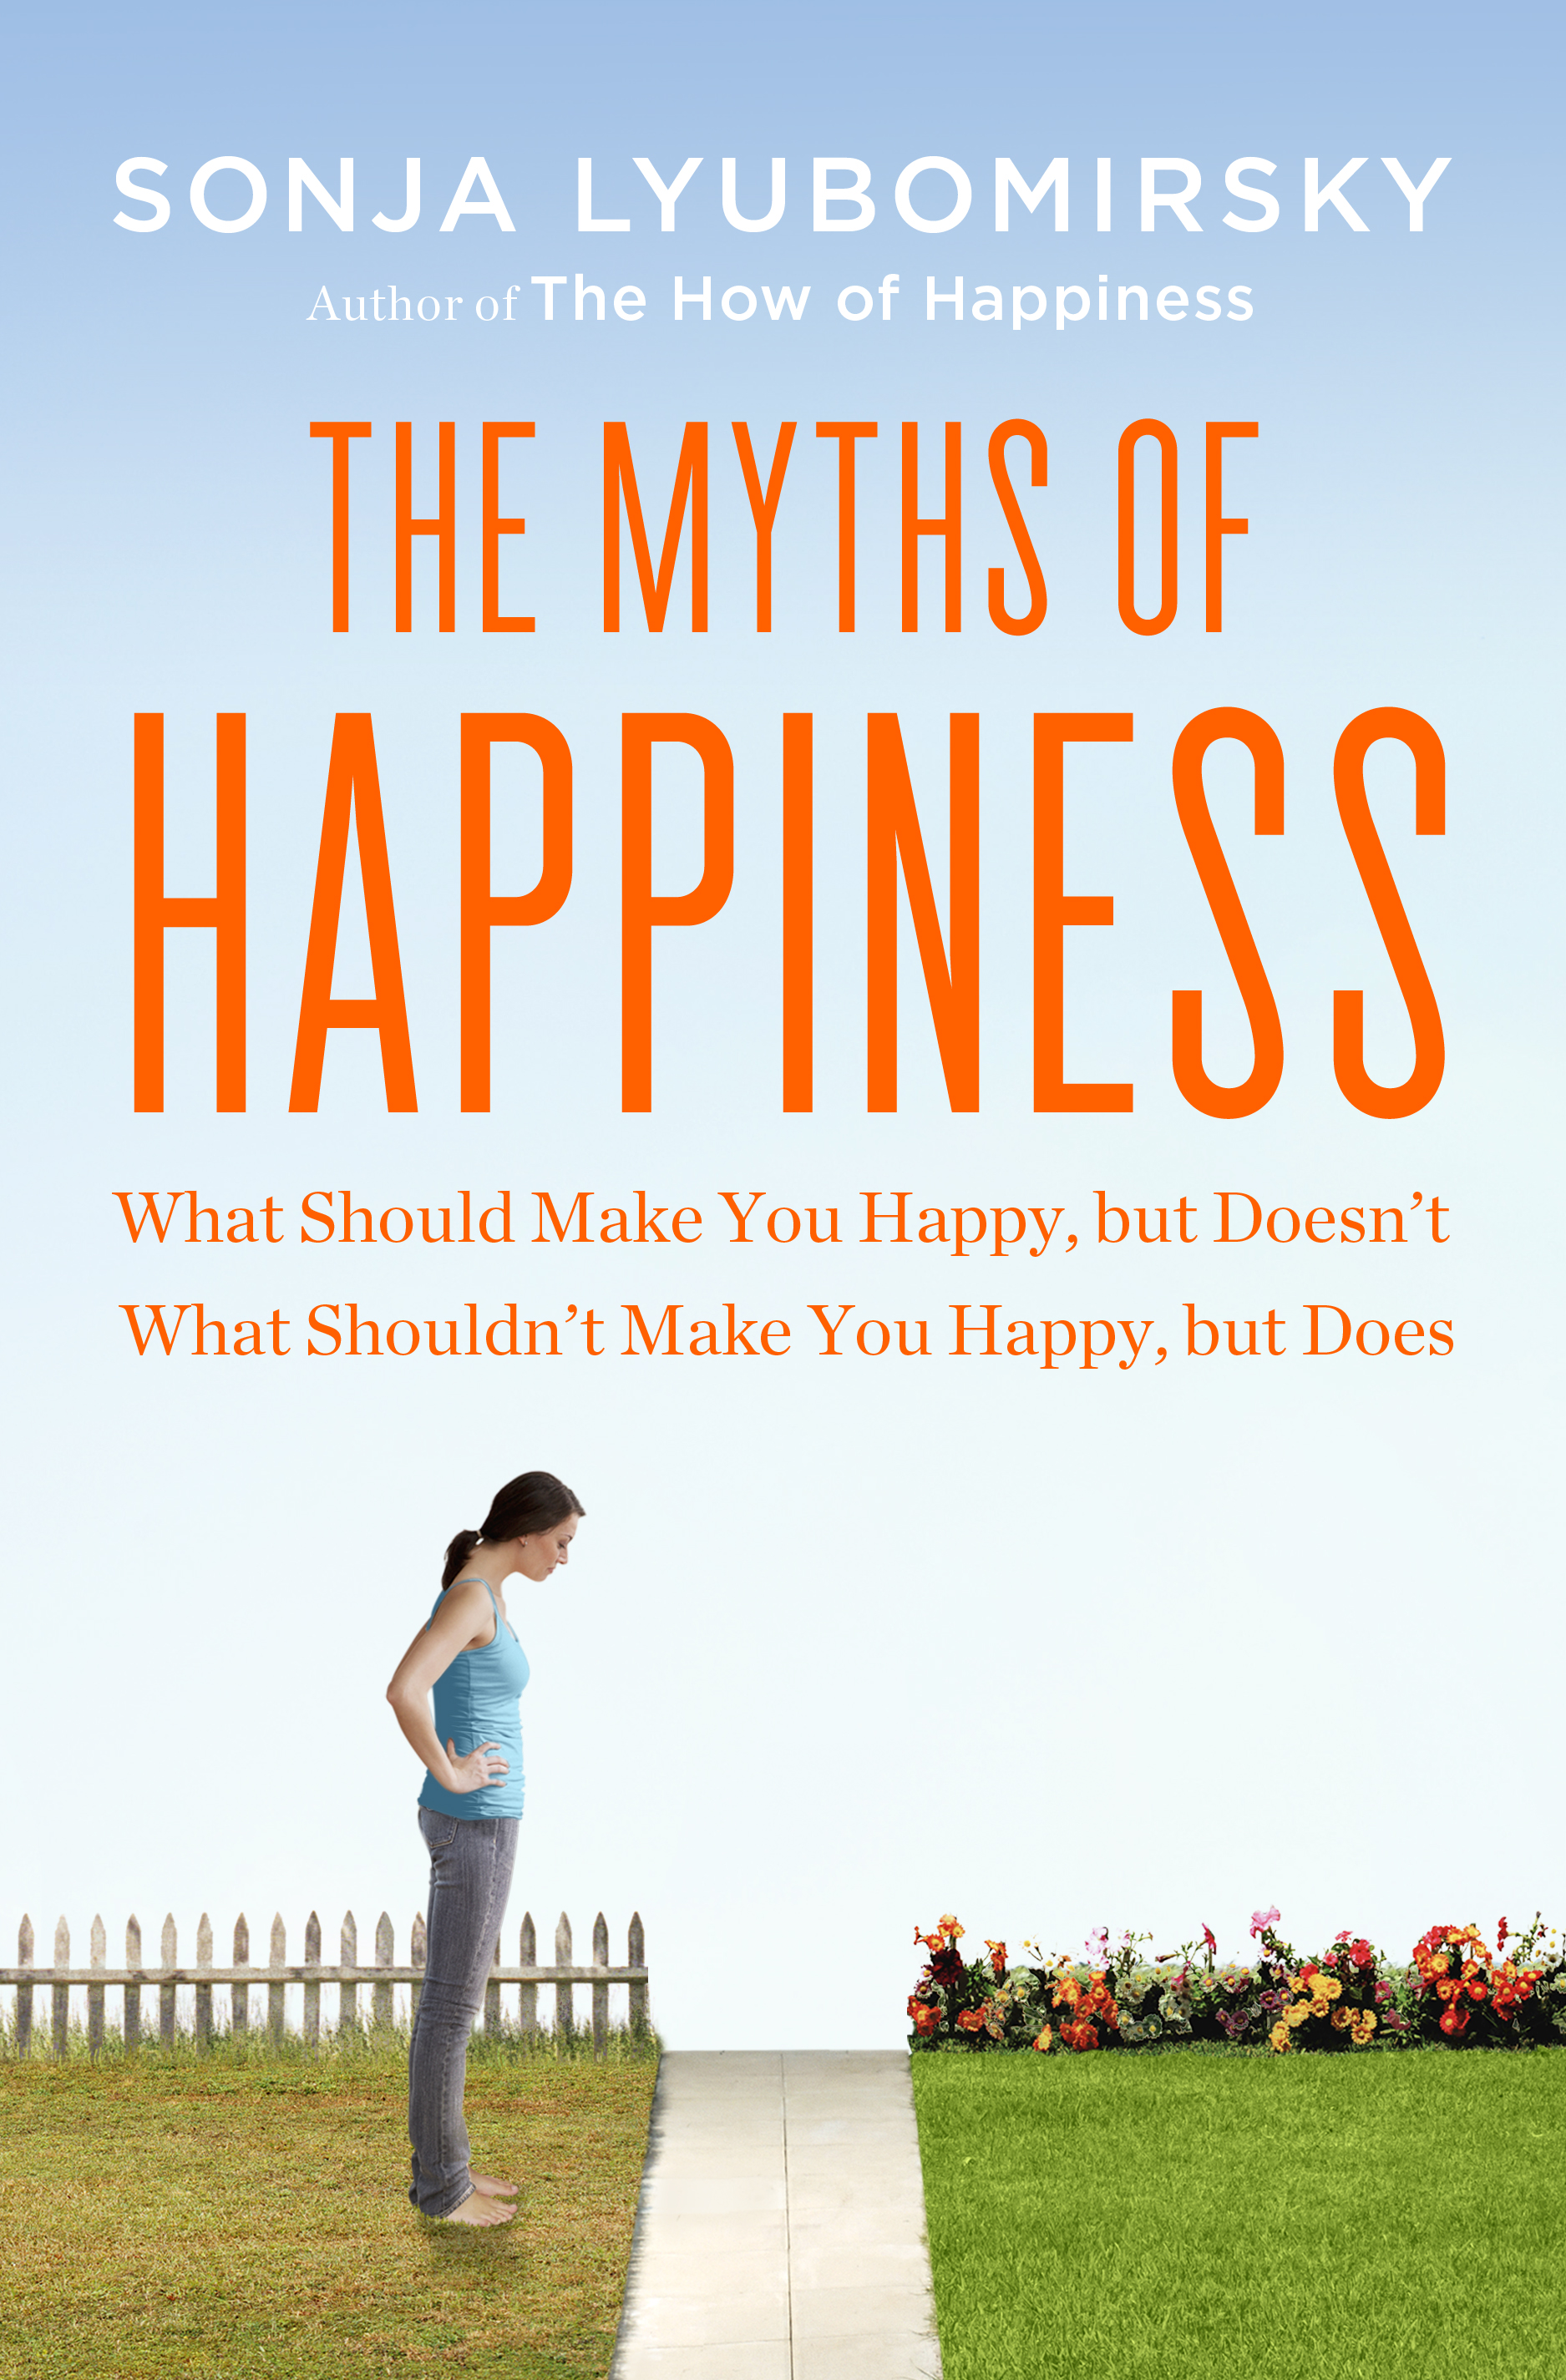 The Myths Of Happiness